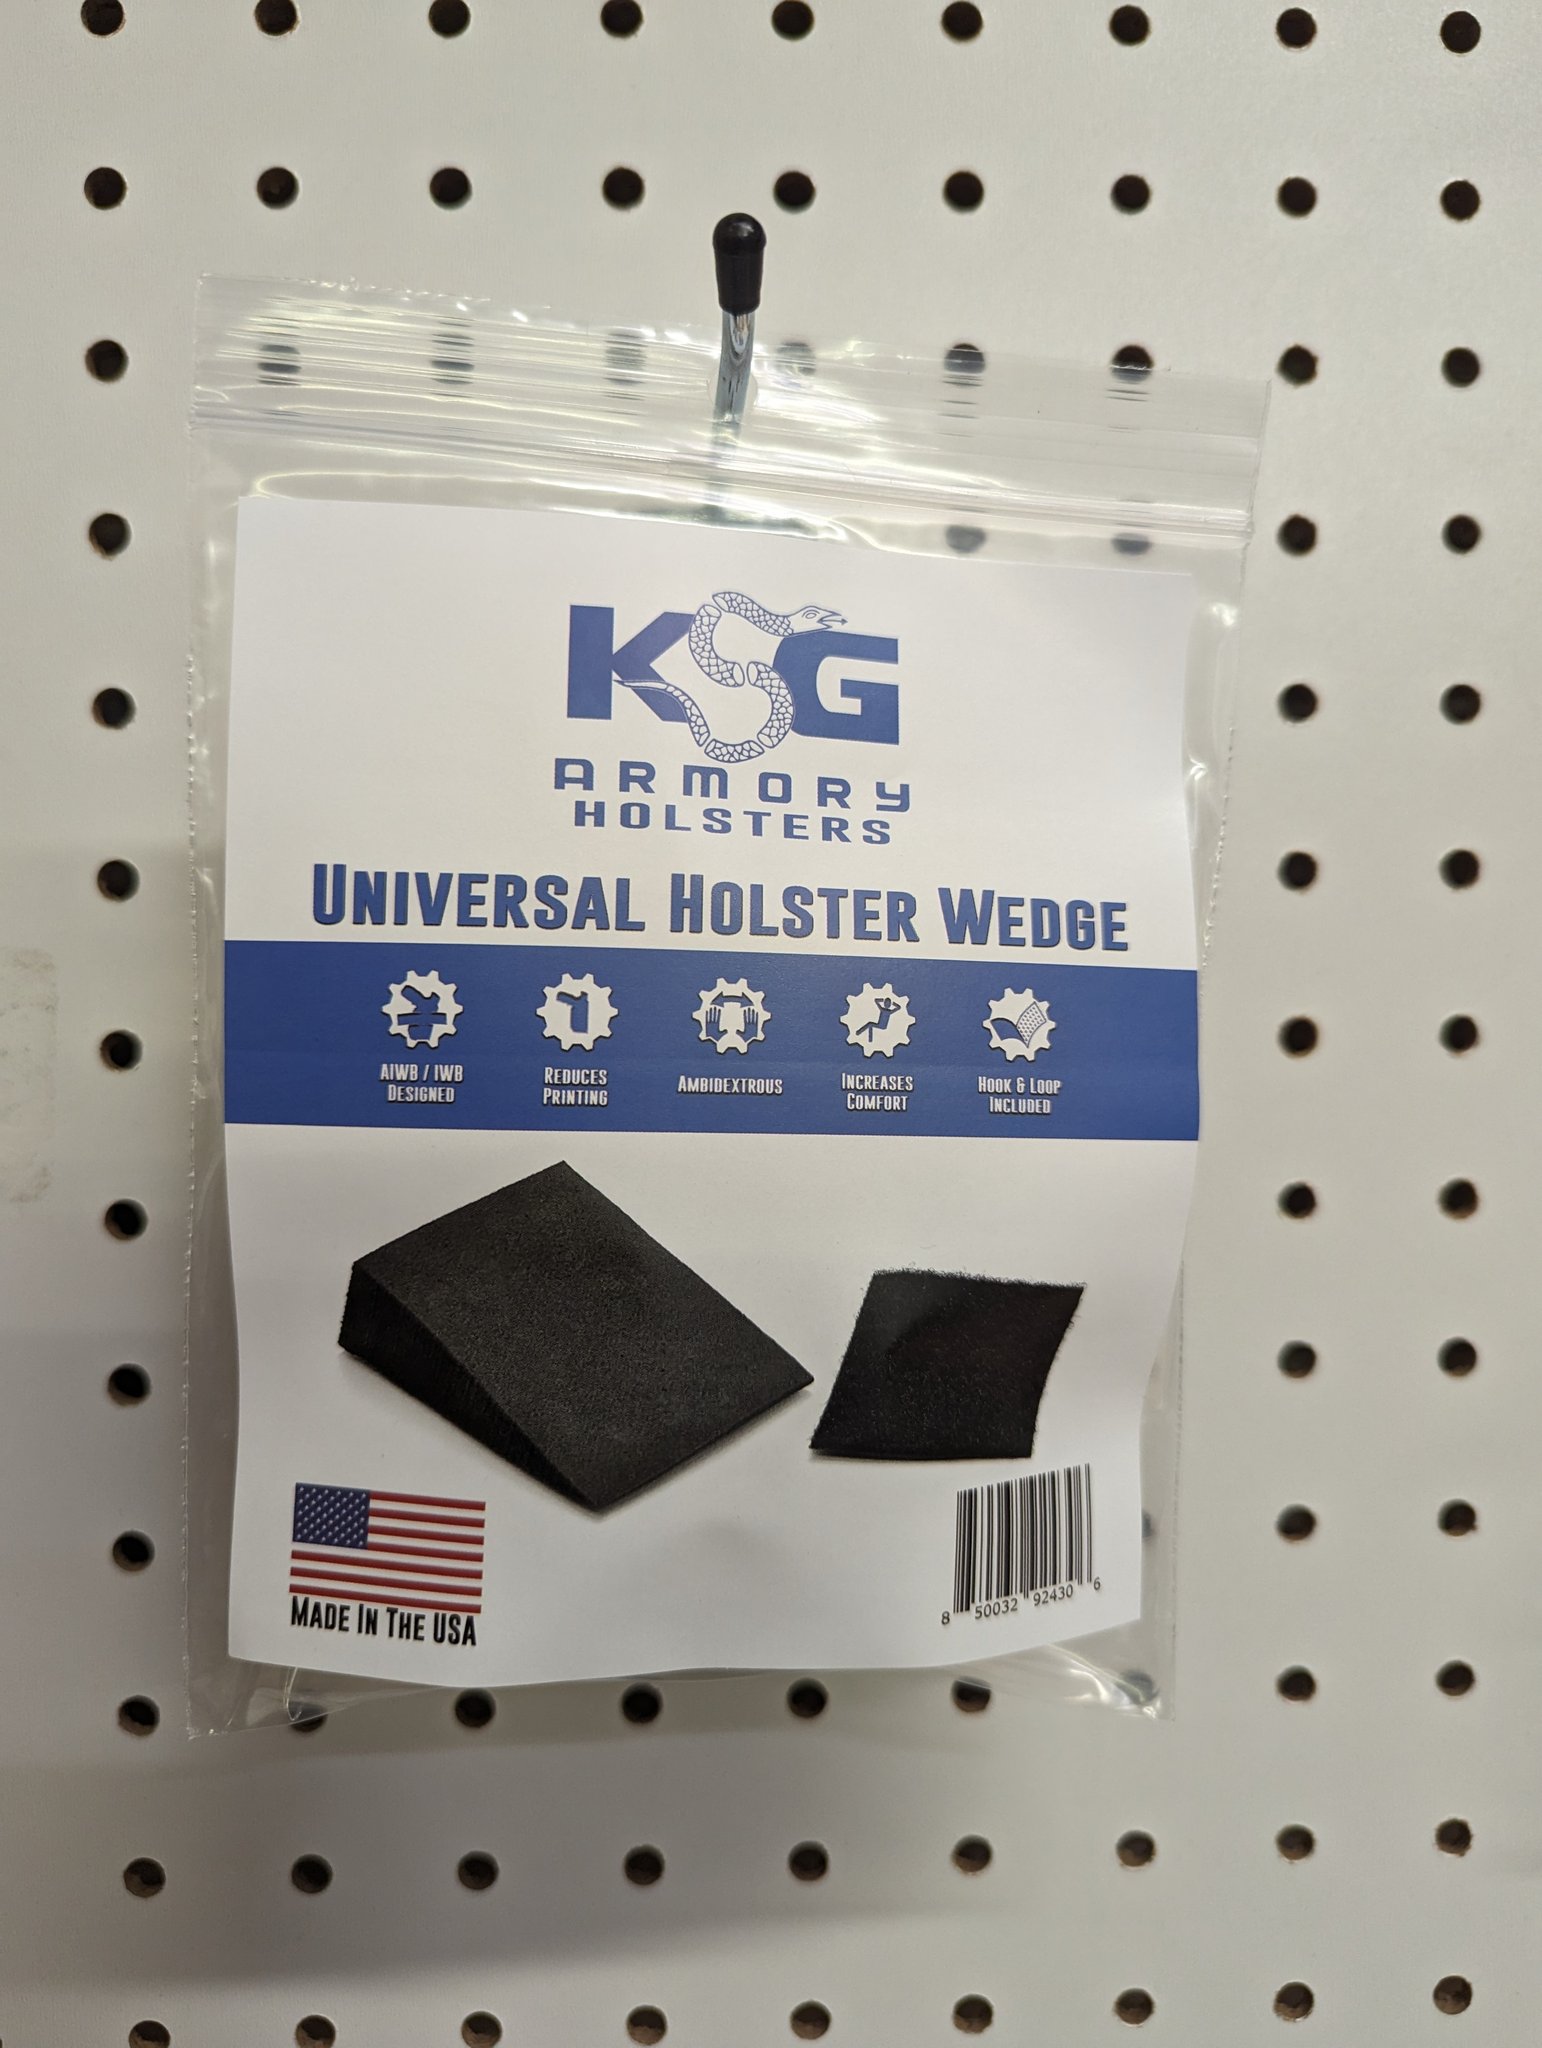 Lexington IWB Concealed Carry Holster by KSG Armory